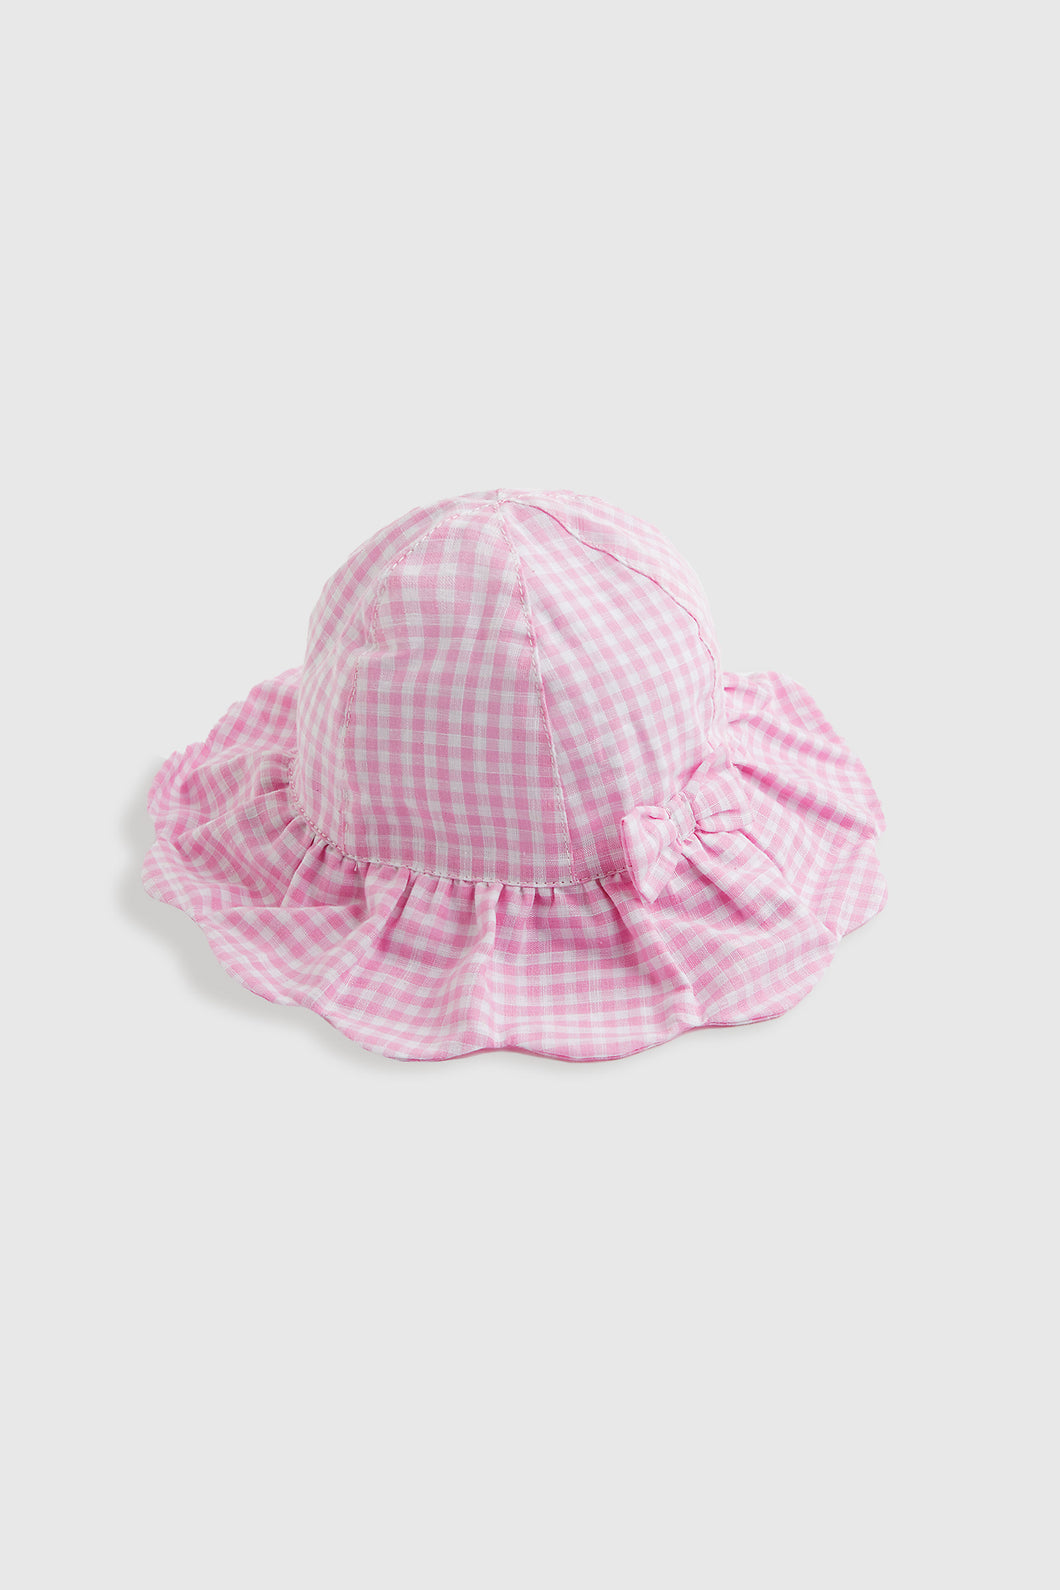 Mothercare Gingham Sunsafe Baby Sun Hat